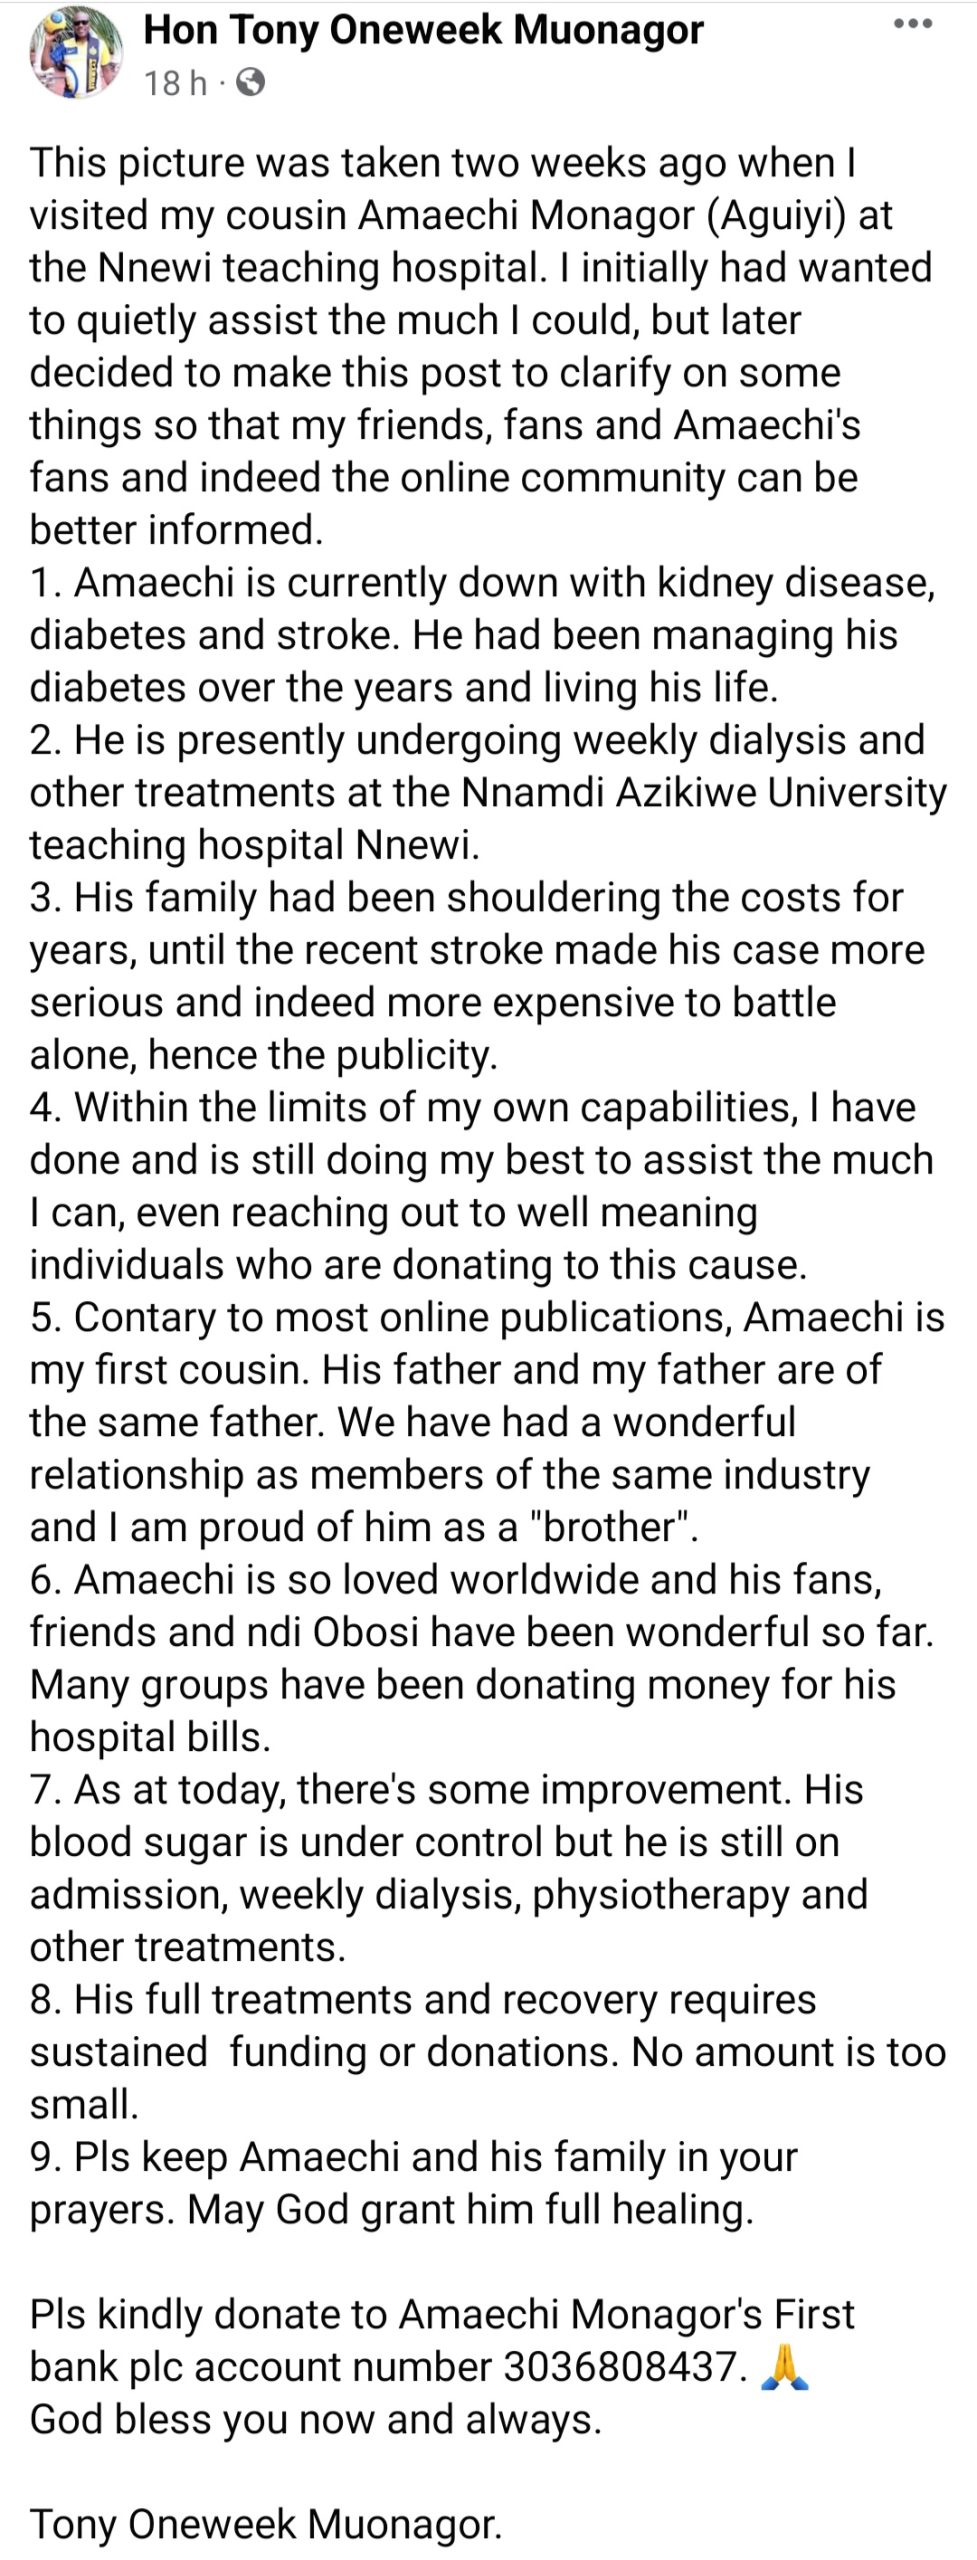 Amaechi Muonagor is down with kidney disease, diabetes,  and stroke and undergoes weekly dialysis ? Actor Tony Oneweek gives update on his cousin